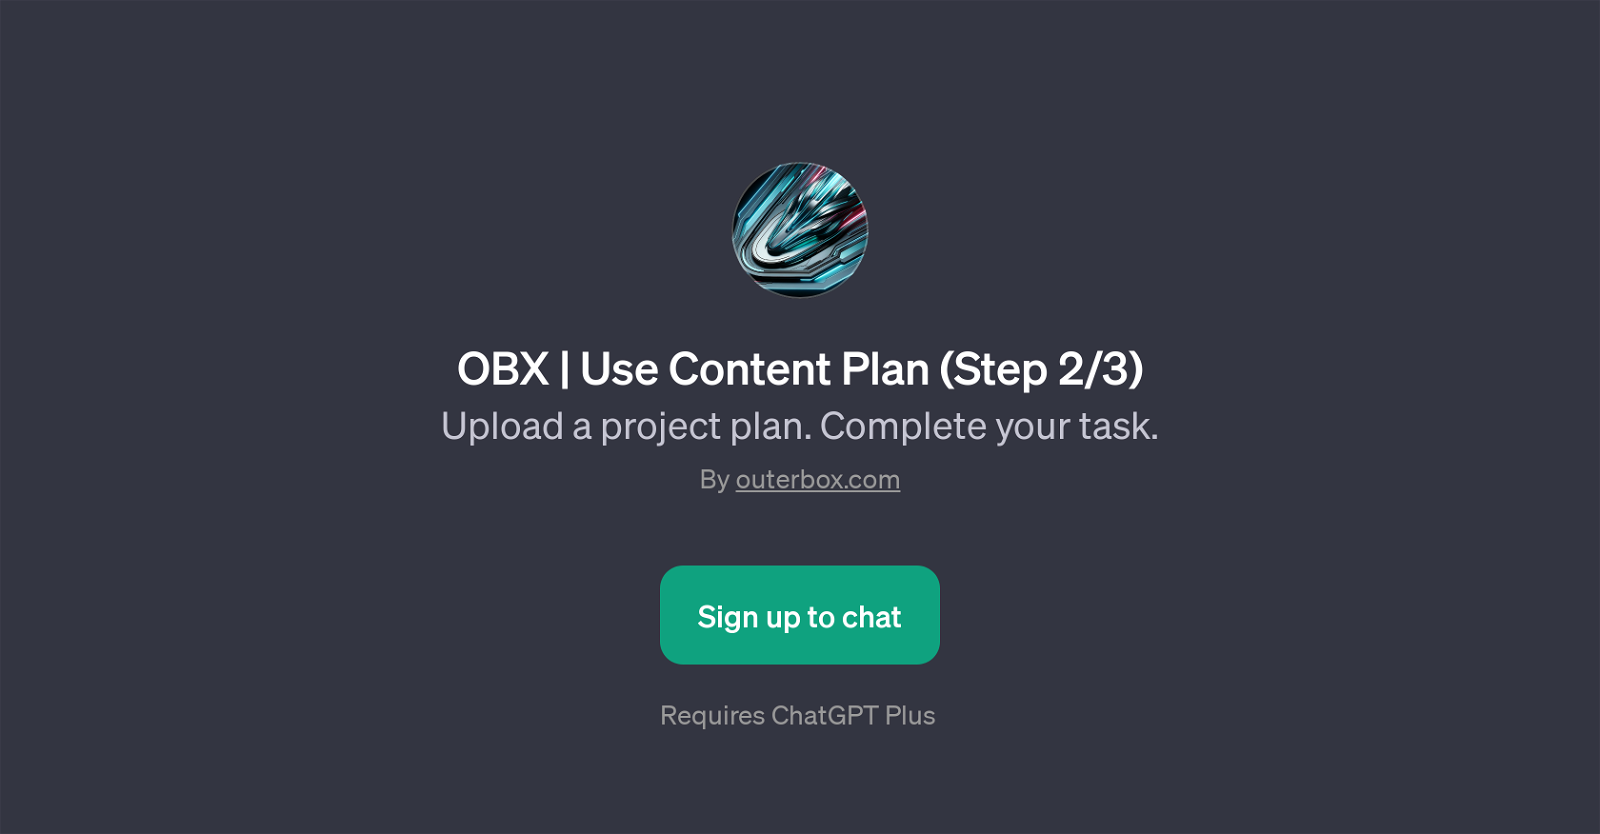 OBX | Use Content Plan website